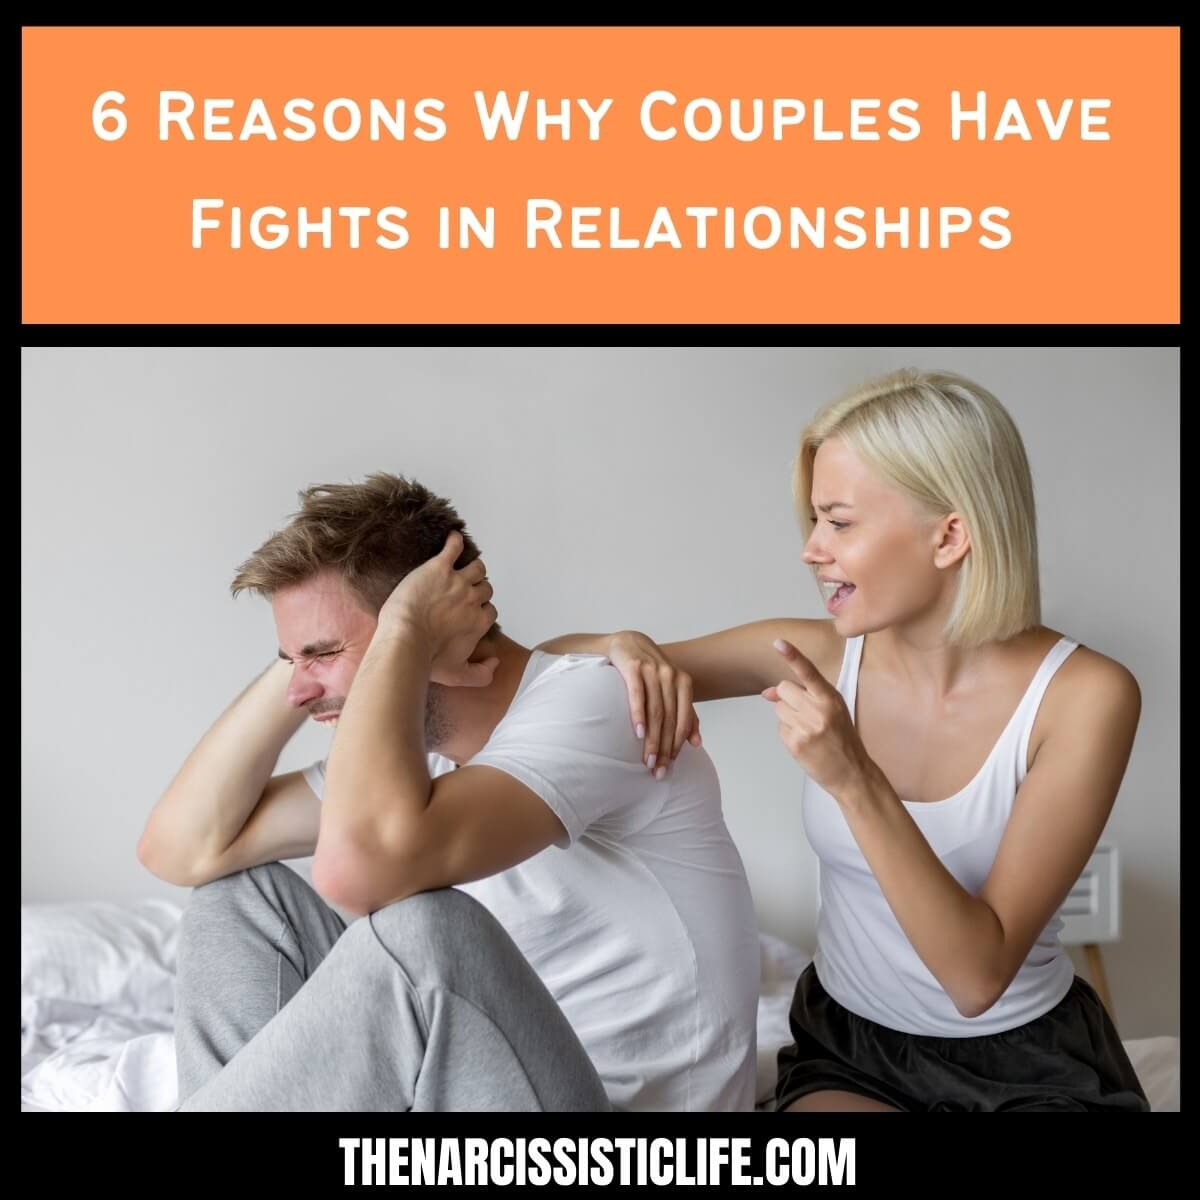 6 Reasons Why Couples Have Fights in Relationships